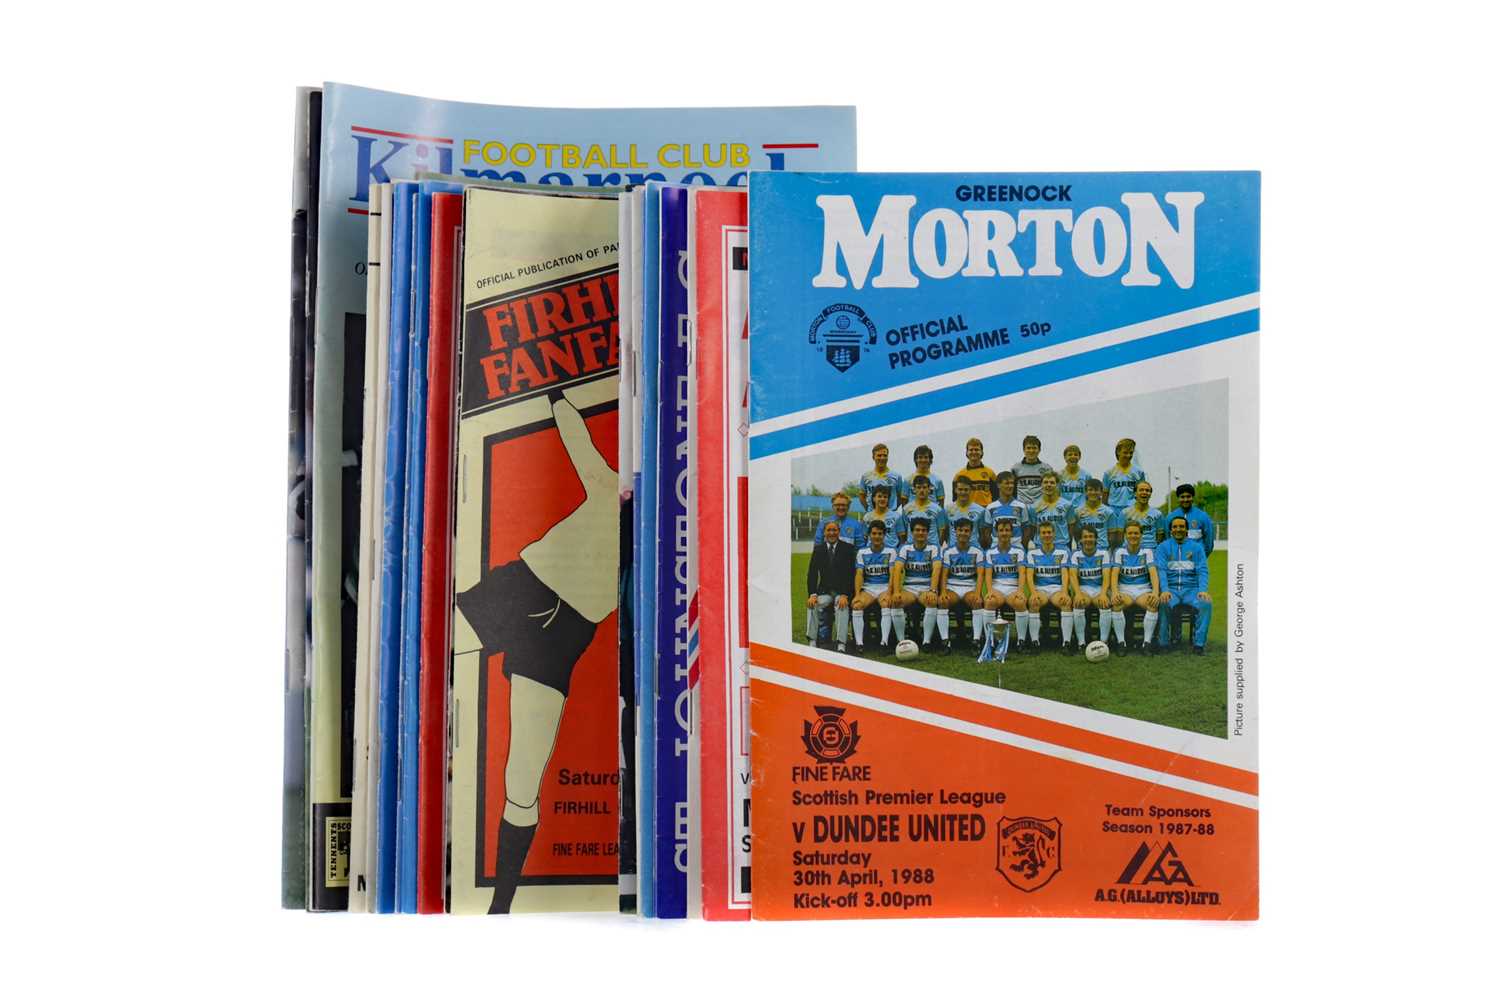 Lot 1143 - A COLLECTION OF GREENOCK MORTON FOOTBALL CLUB AND OTHER FOOTBALL PROGRAMMES